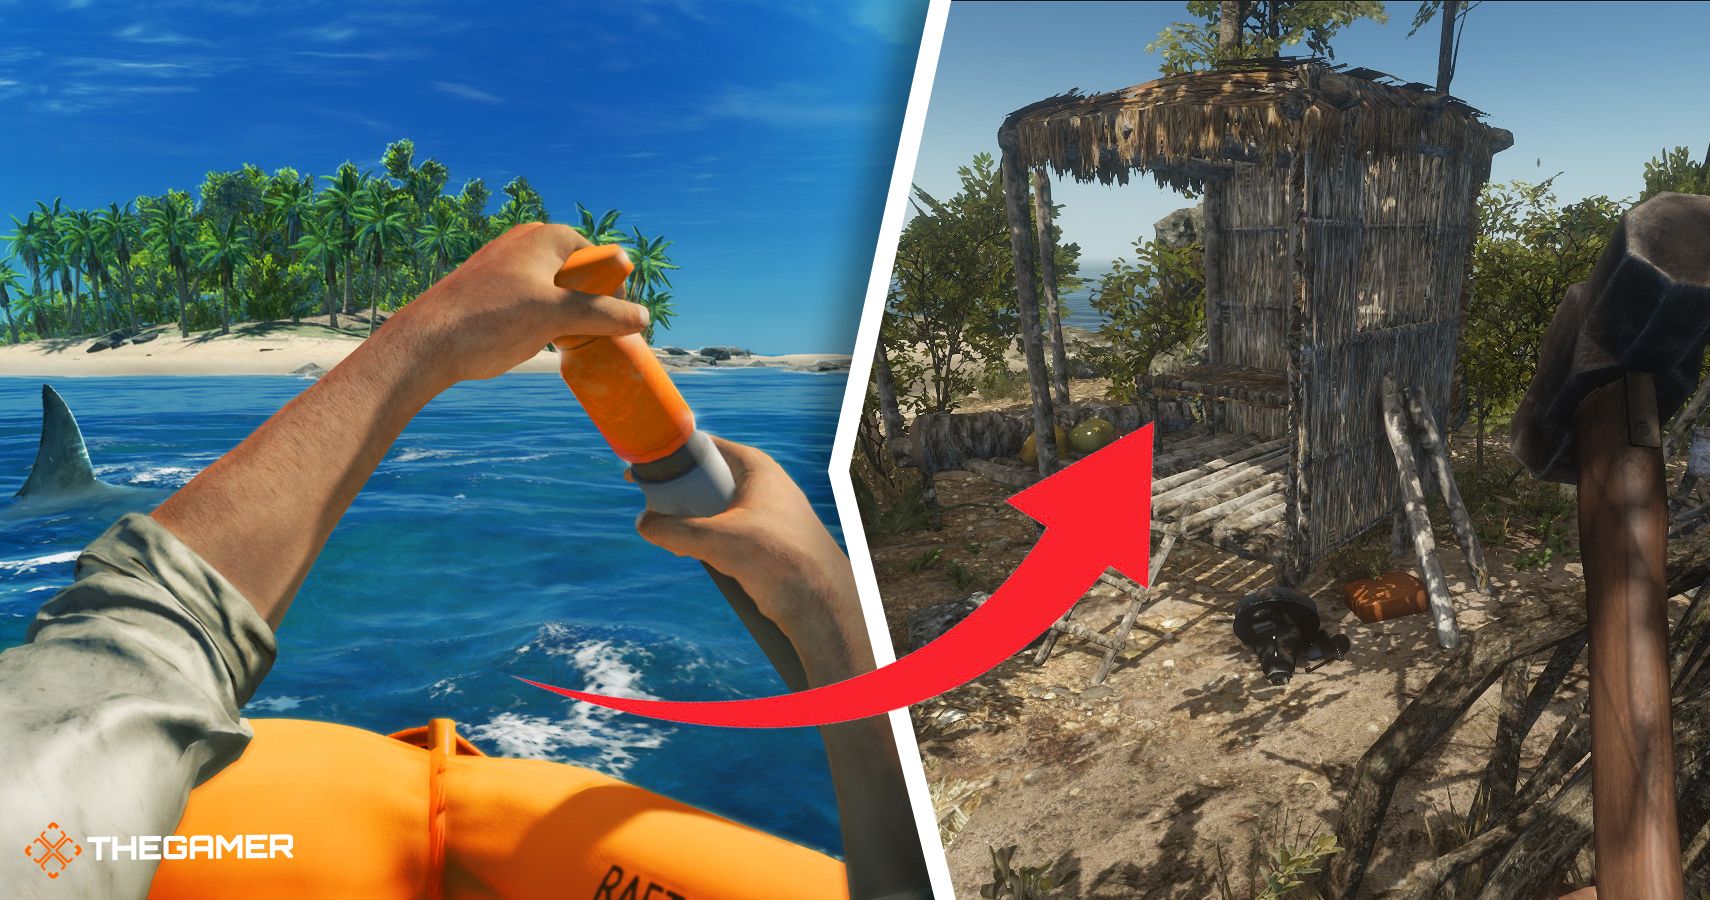 Stranded Deep: How To Save and Other Tips & Tricks for New Players